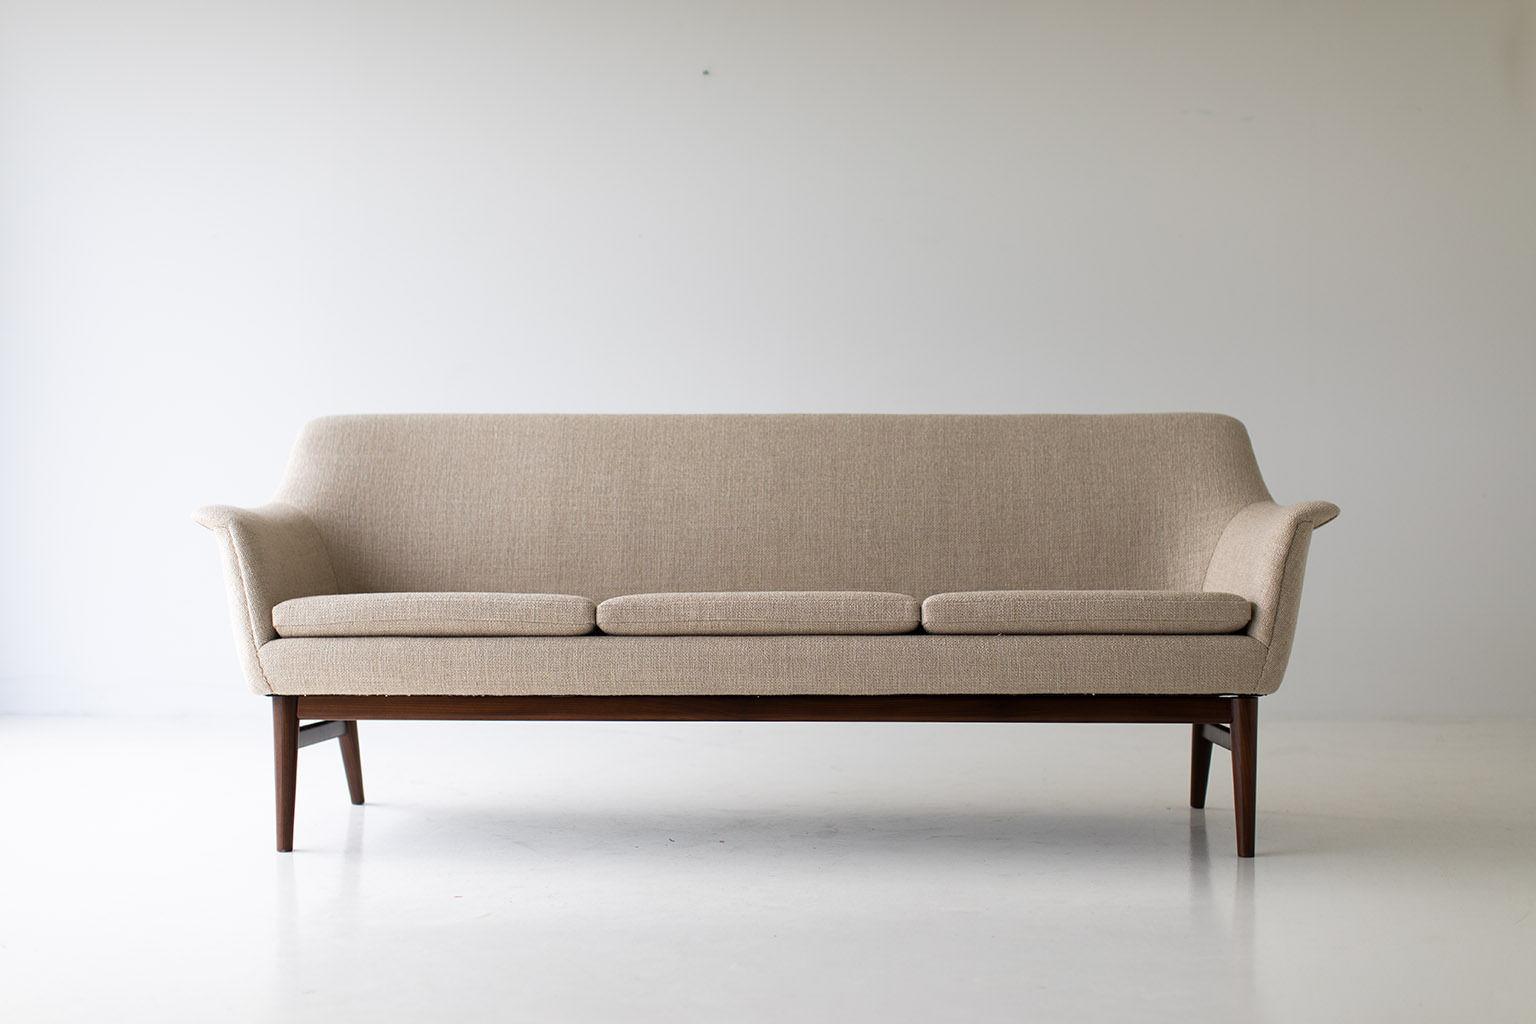 Designer: Unknown. 

Manufacturer: Unknown.
Period or model: Mid-Century Modern.
Specs: teak, commercial grade fabric. 

Condition: 

This mid century sofa in excellent restored condition. The sofa was originally purchased in Denmark and has